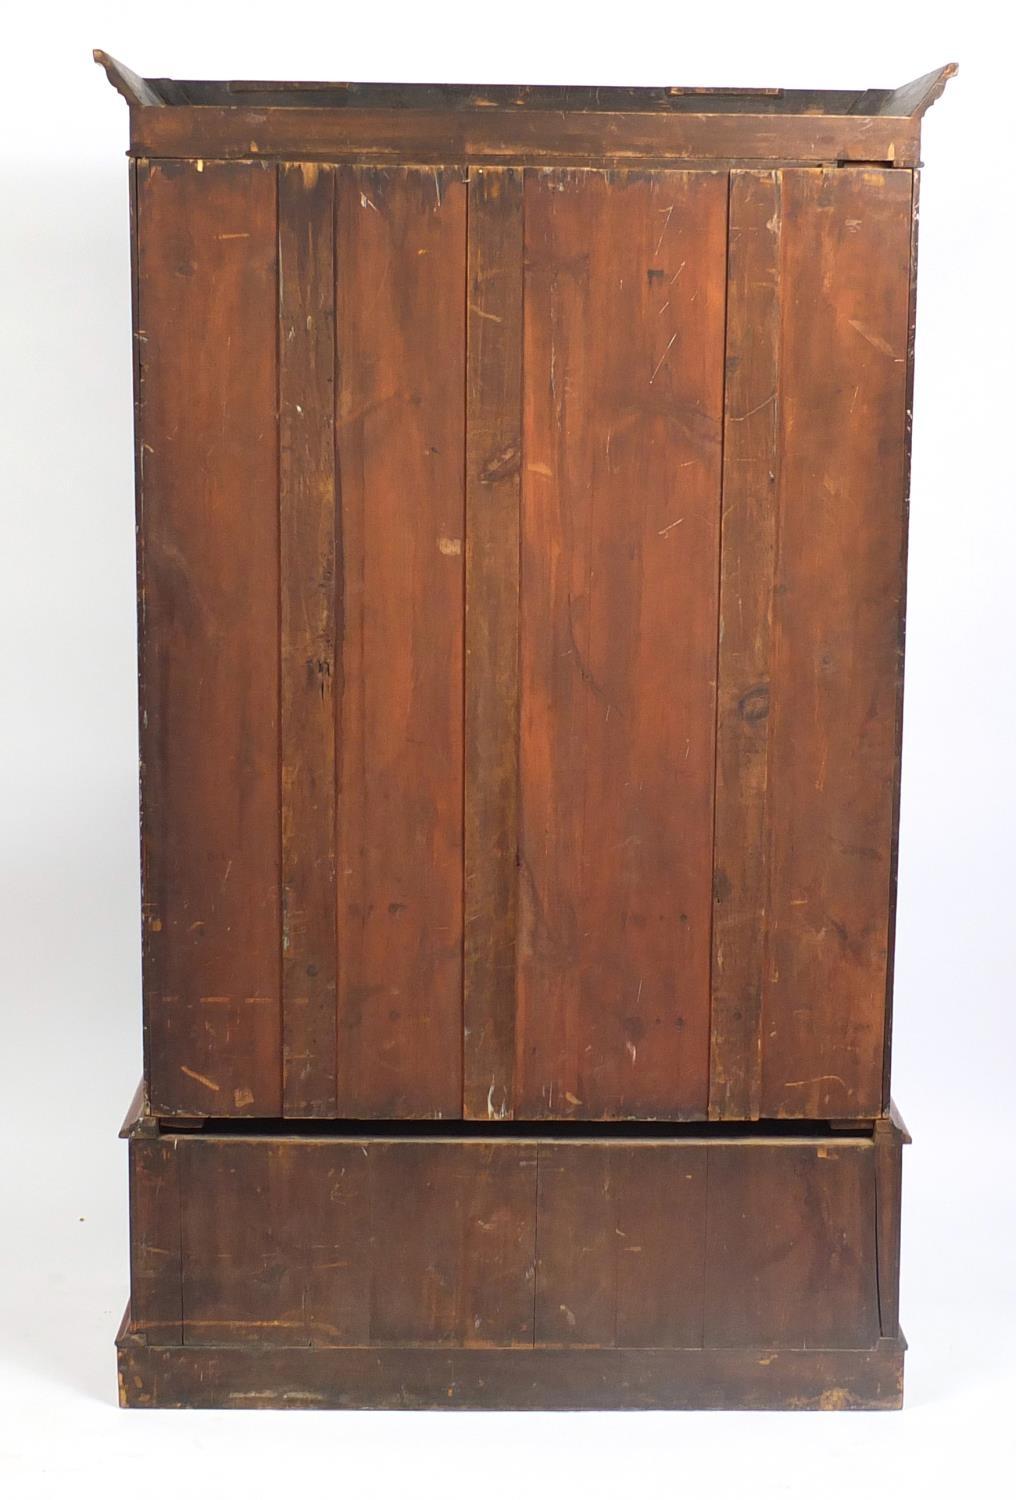 Victorian mahogany wardrobe with centre mirrored door and base drawer, 198cm H x 120cm W x 52cm - Image 3 of 3